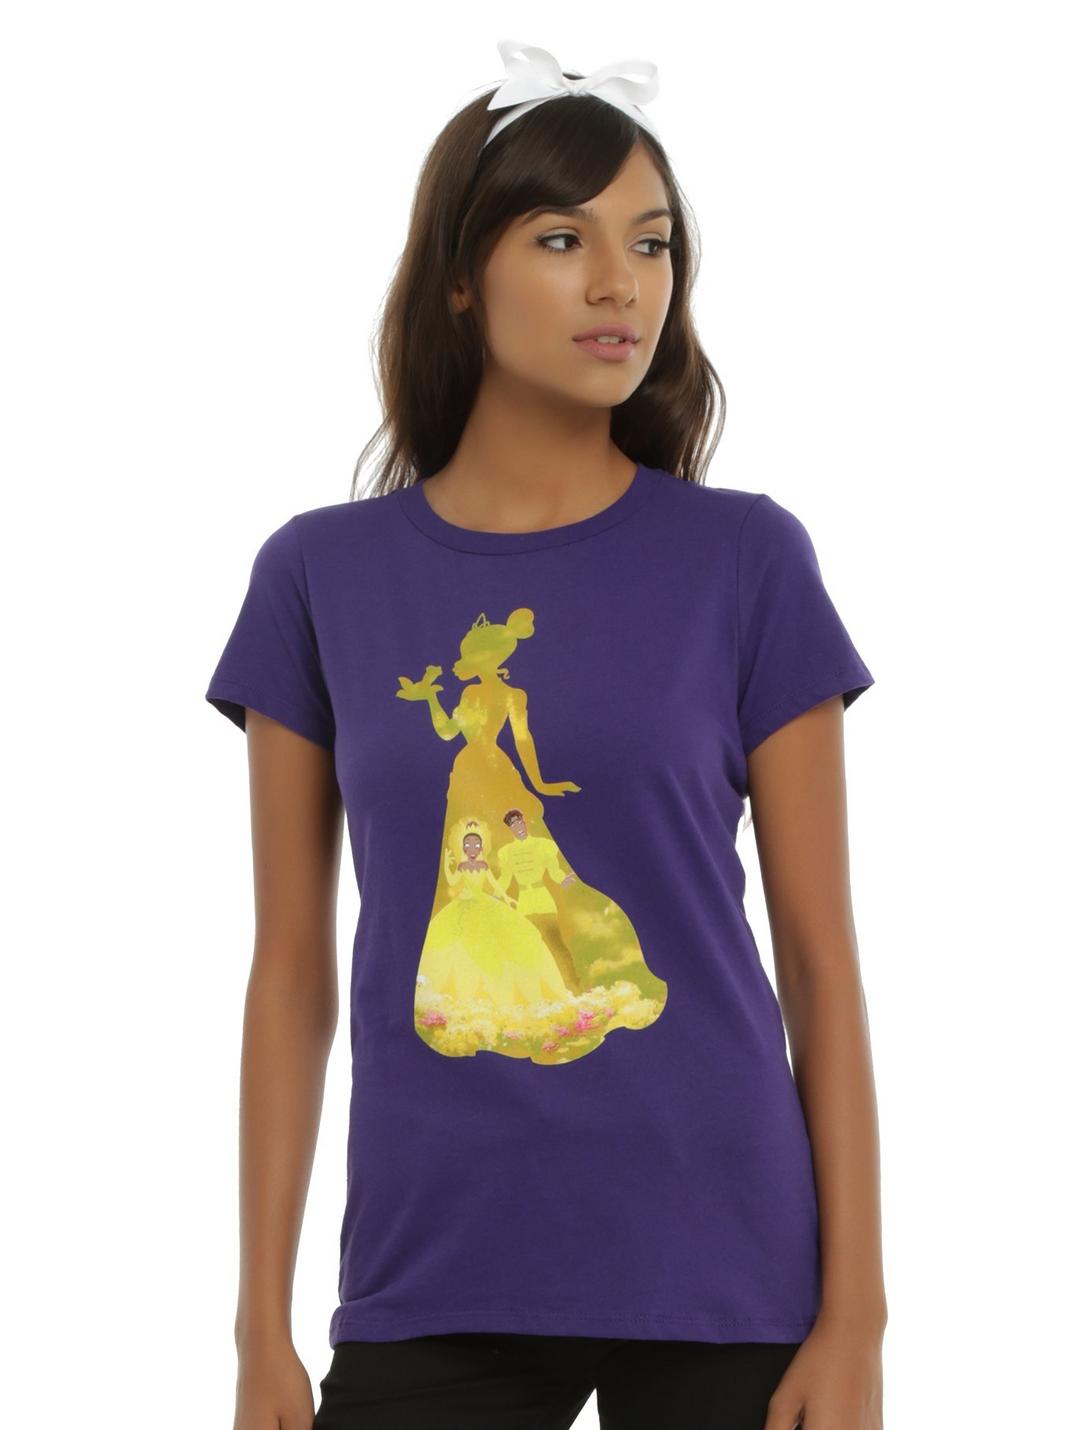 Disney The Princess And The Frog Tiana Silhouette Girls T-Shirt, PURPLE, hi-res